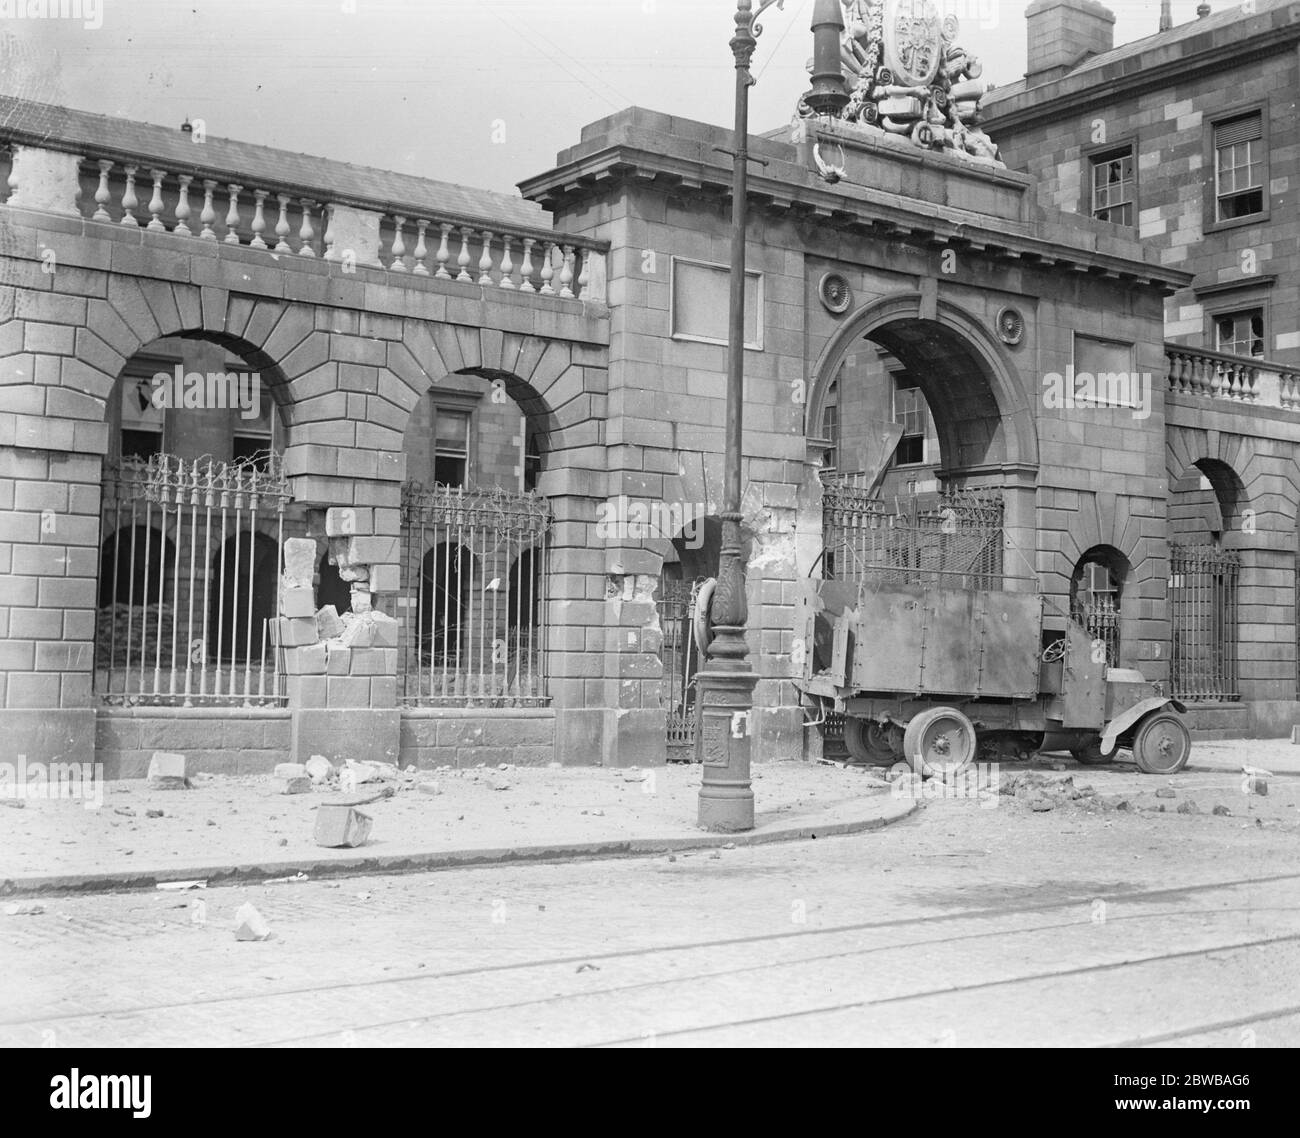 The Great Battle of Dublin . The capture of the Four Courts in Dublin . The riverfront of the Four Courts showing an armoured car used in the attack by the Irish Free State troops during the fire rush of the storming party . 1 July 1922 Stock Photo